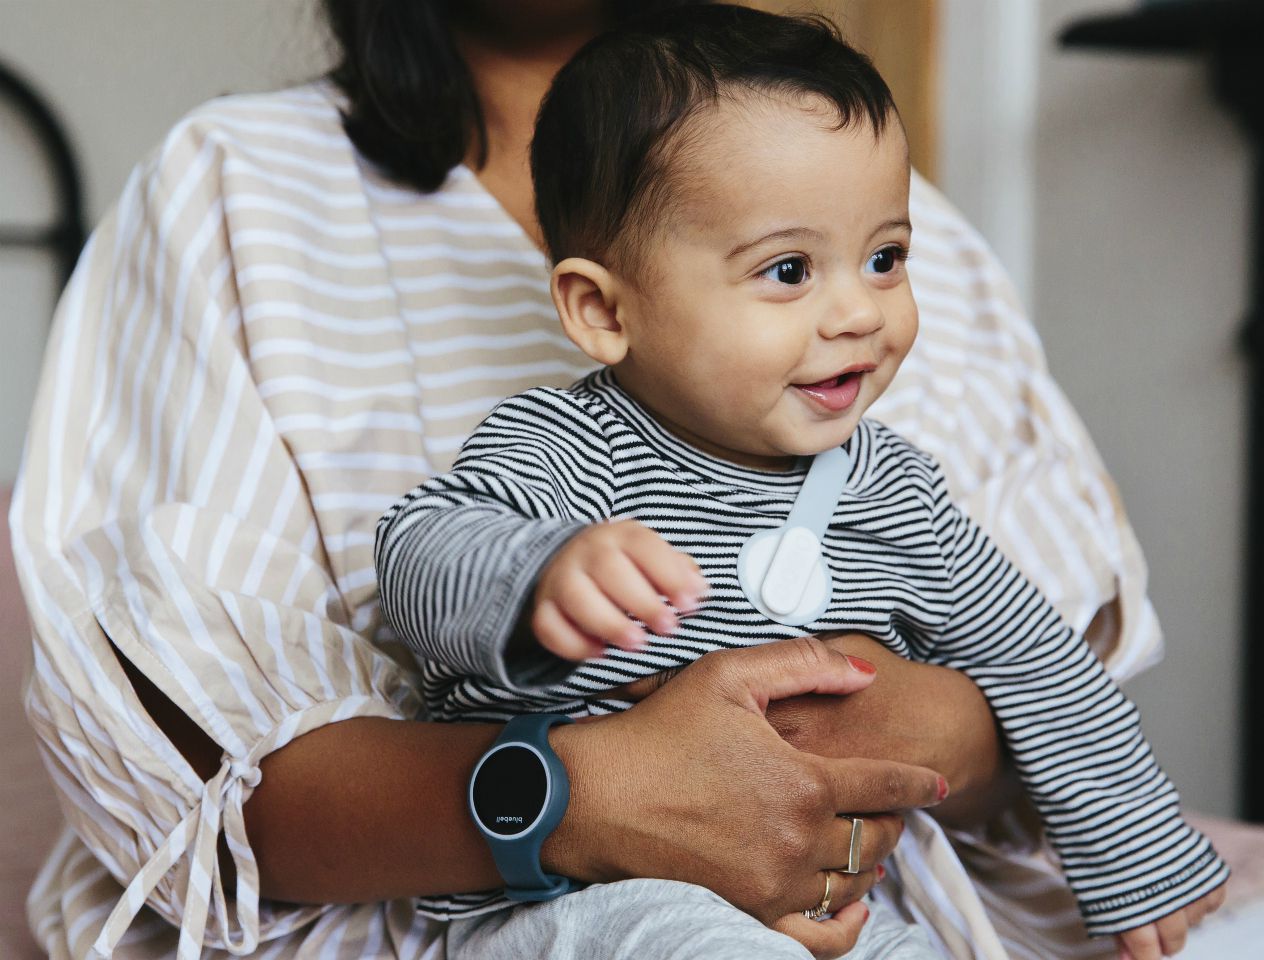 The smart gadgets that make life easier for new parents